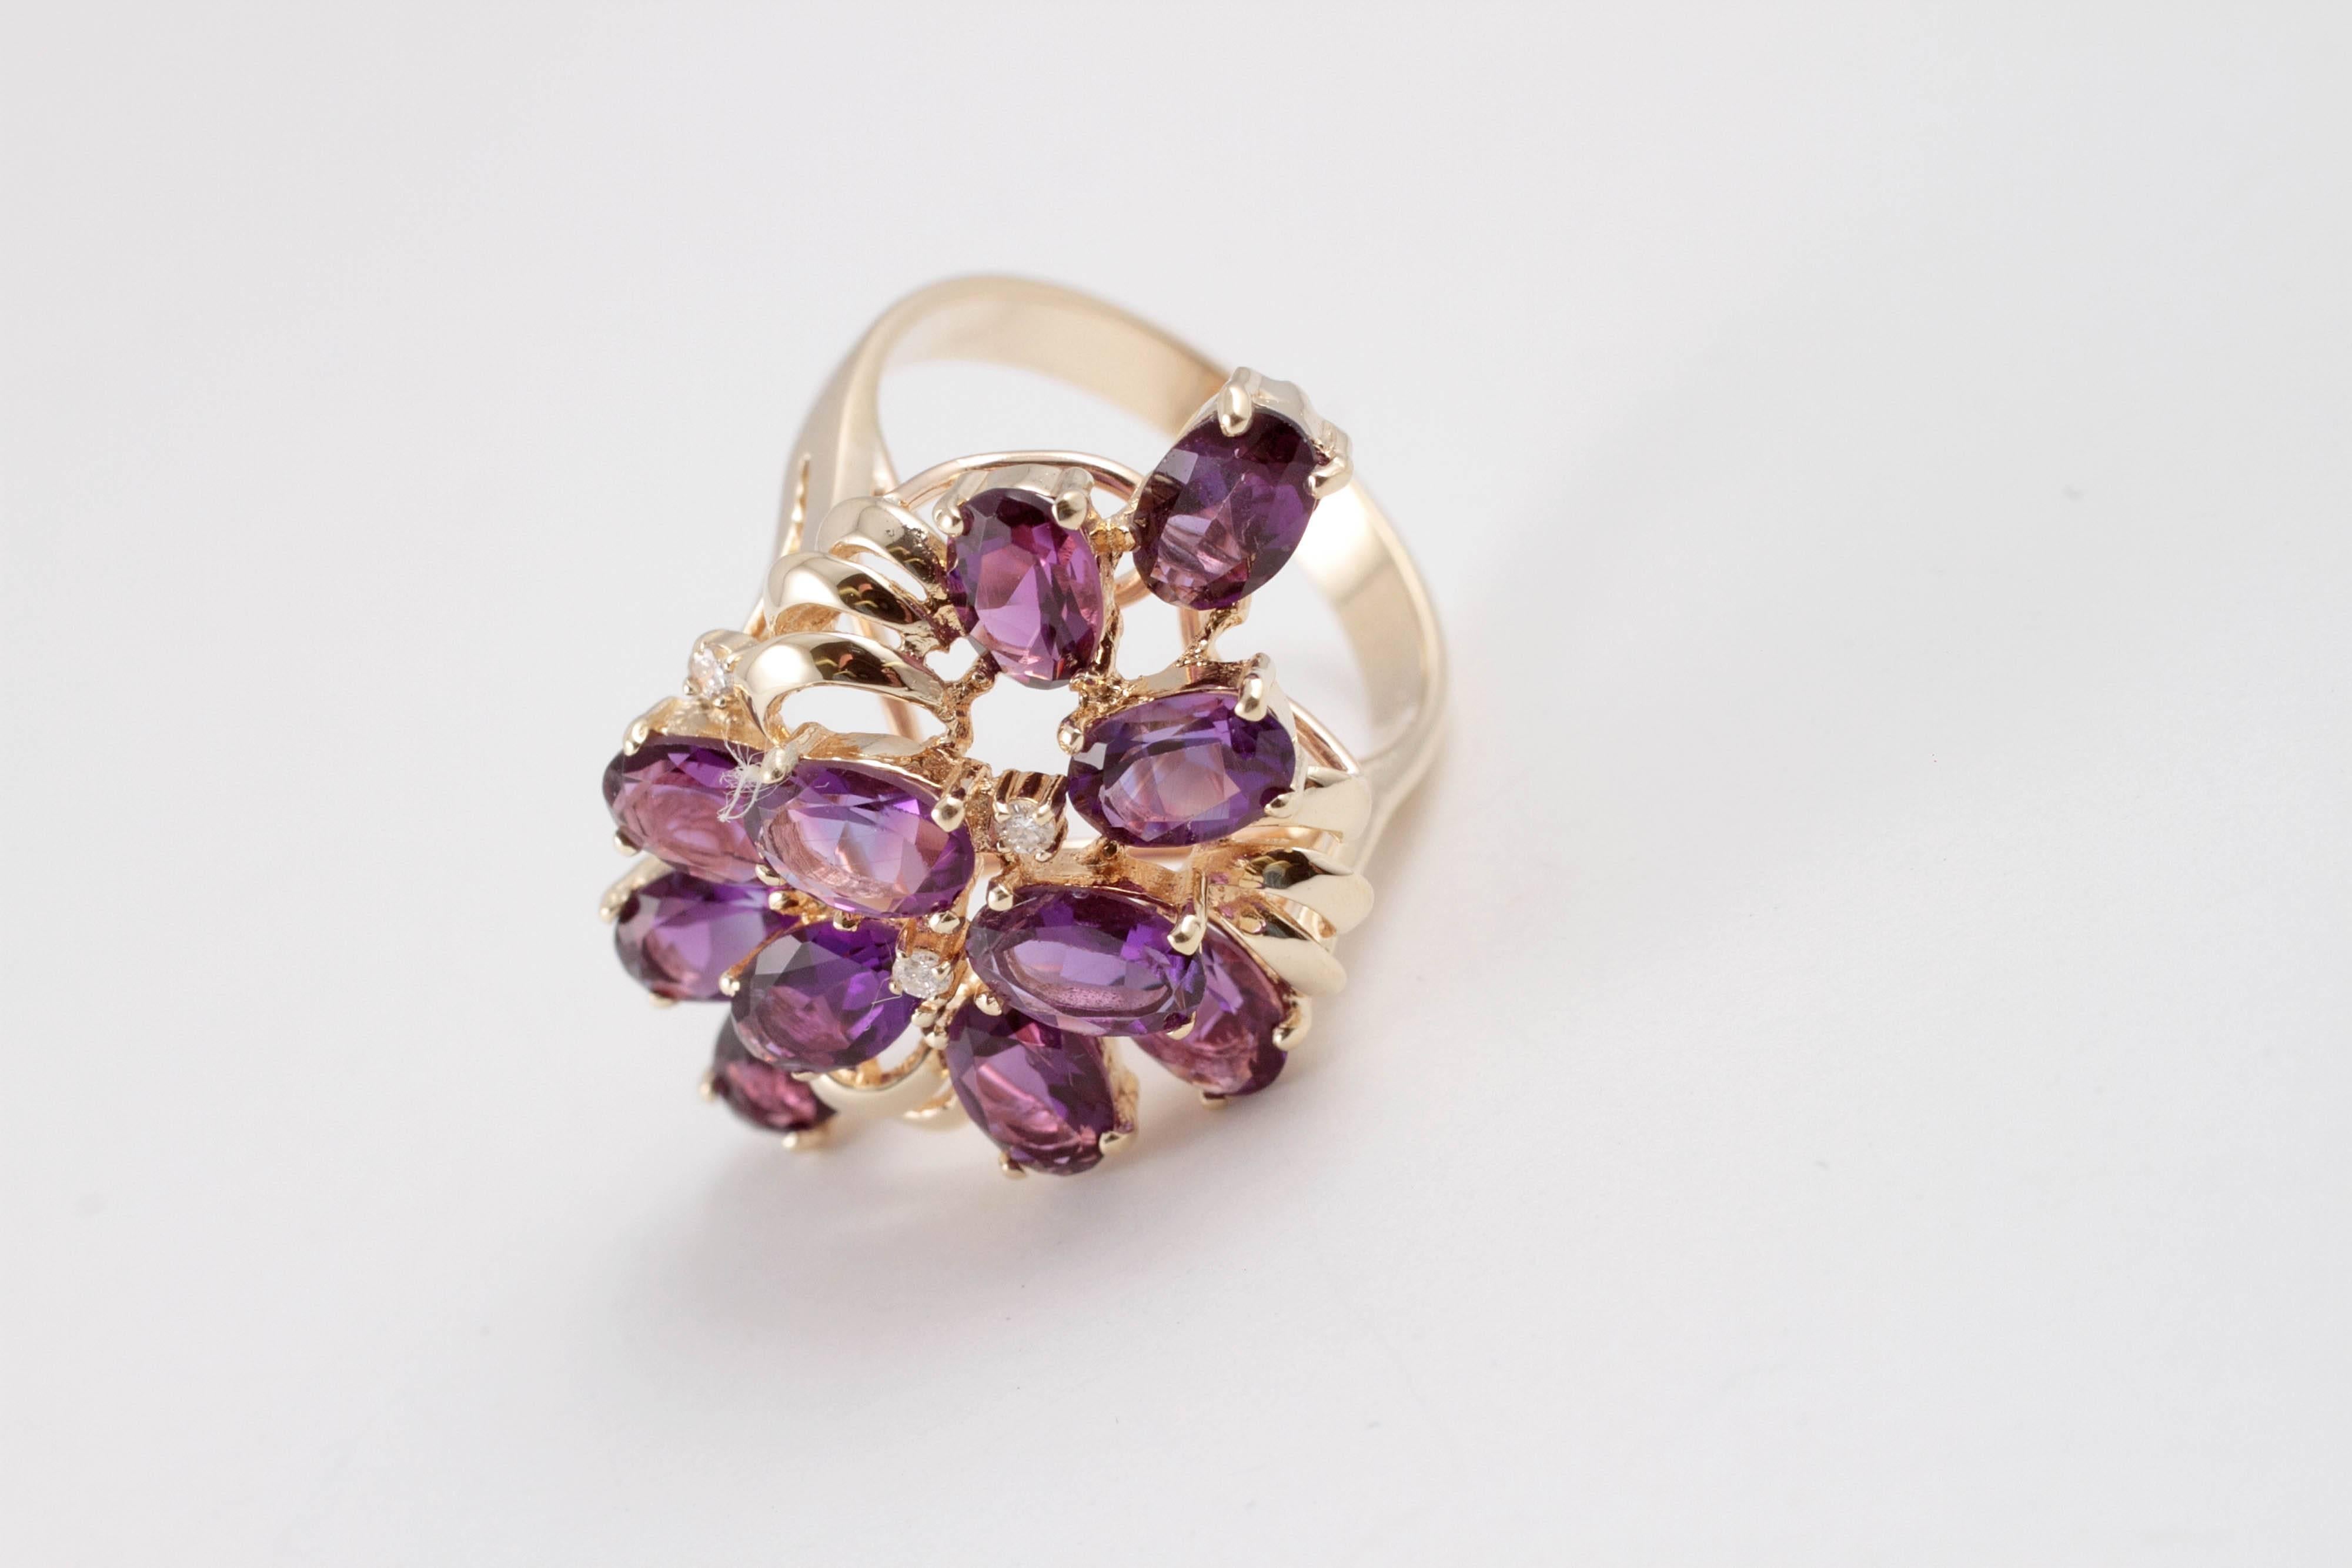 Dazzling amethyst cluster ring sprinkled with diamonds that creates a masterpiece right on your finger.
Ring size 6.5.